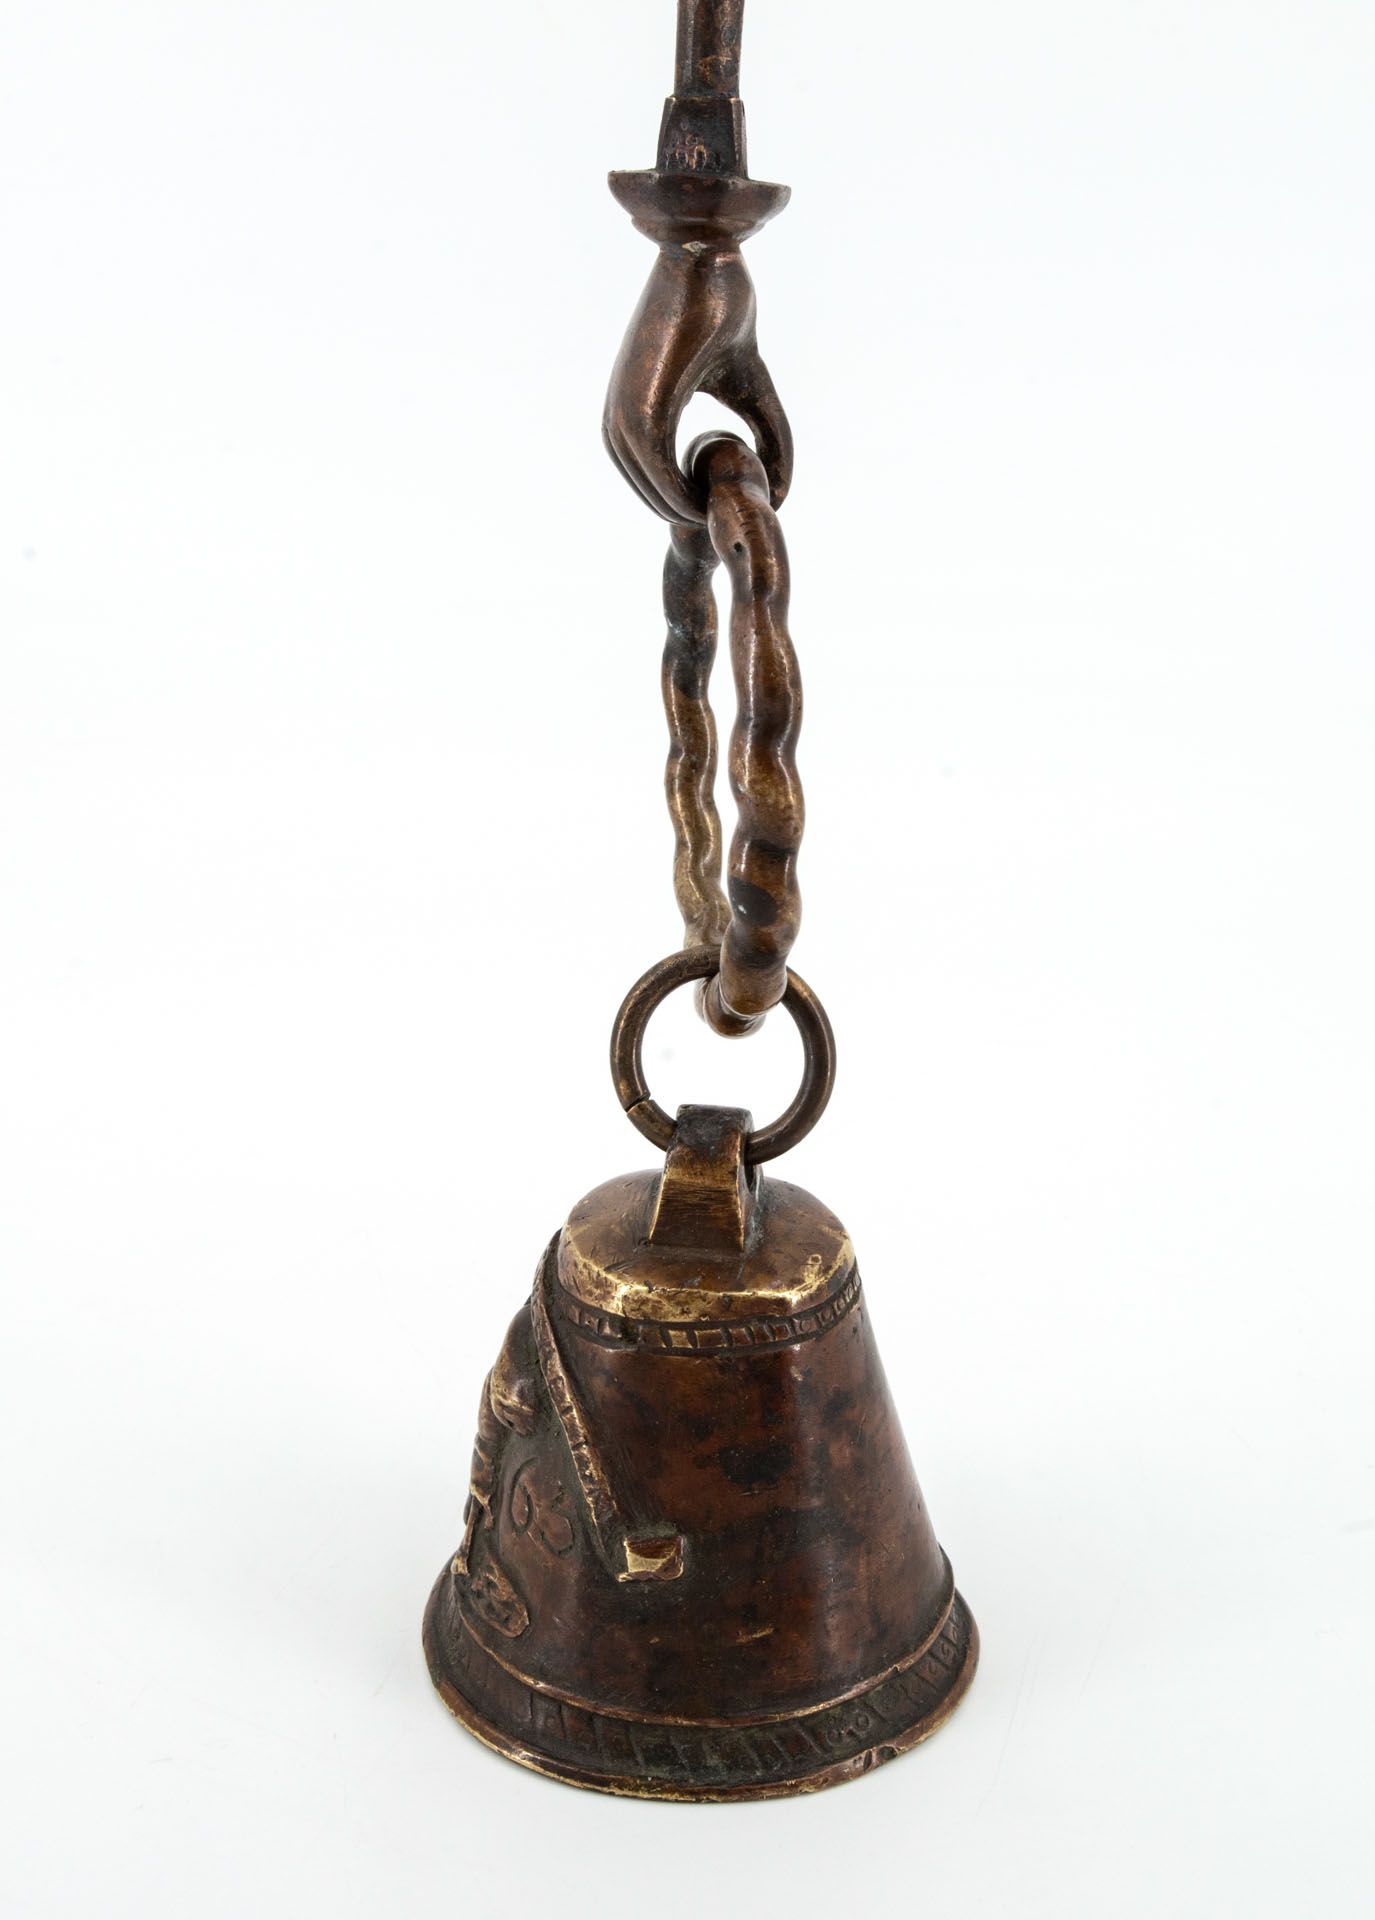 A Rare Renaissance Bronze Hand Bell, Germany, 1563 - Image 2 of 4